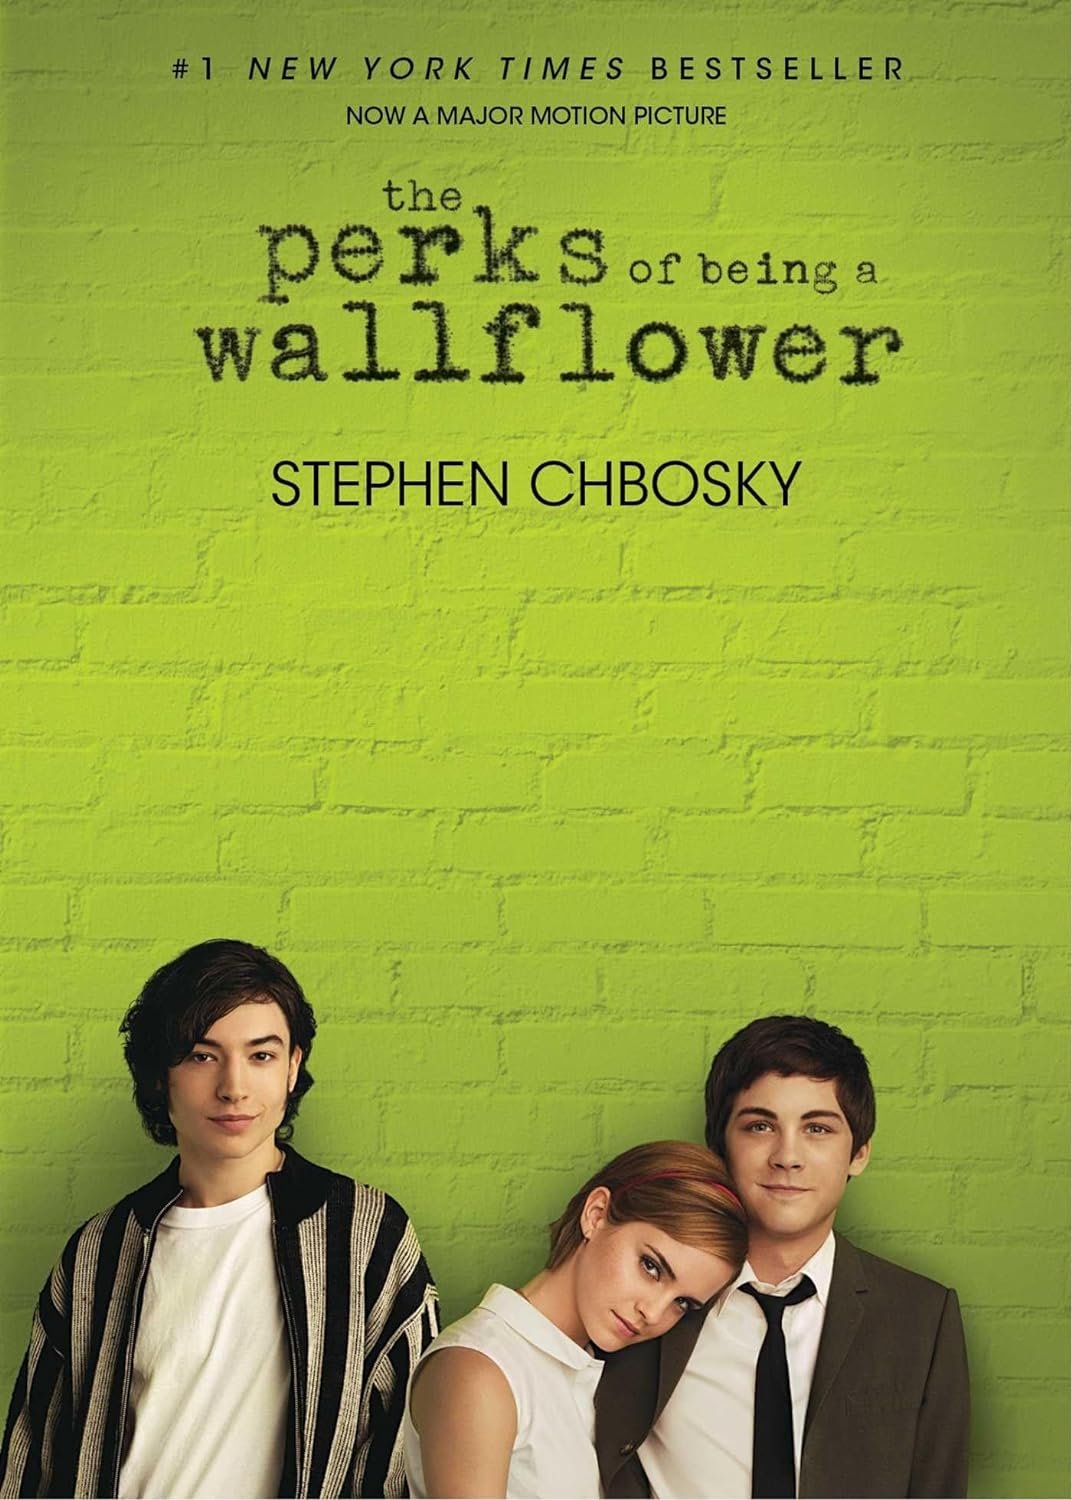 The Perks of Being a Wallflower - Book Cover.jpg